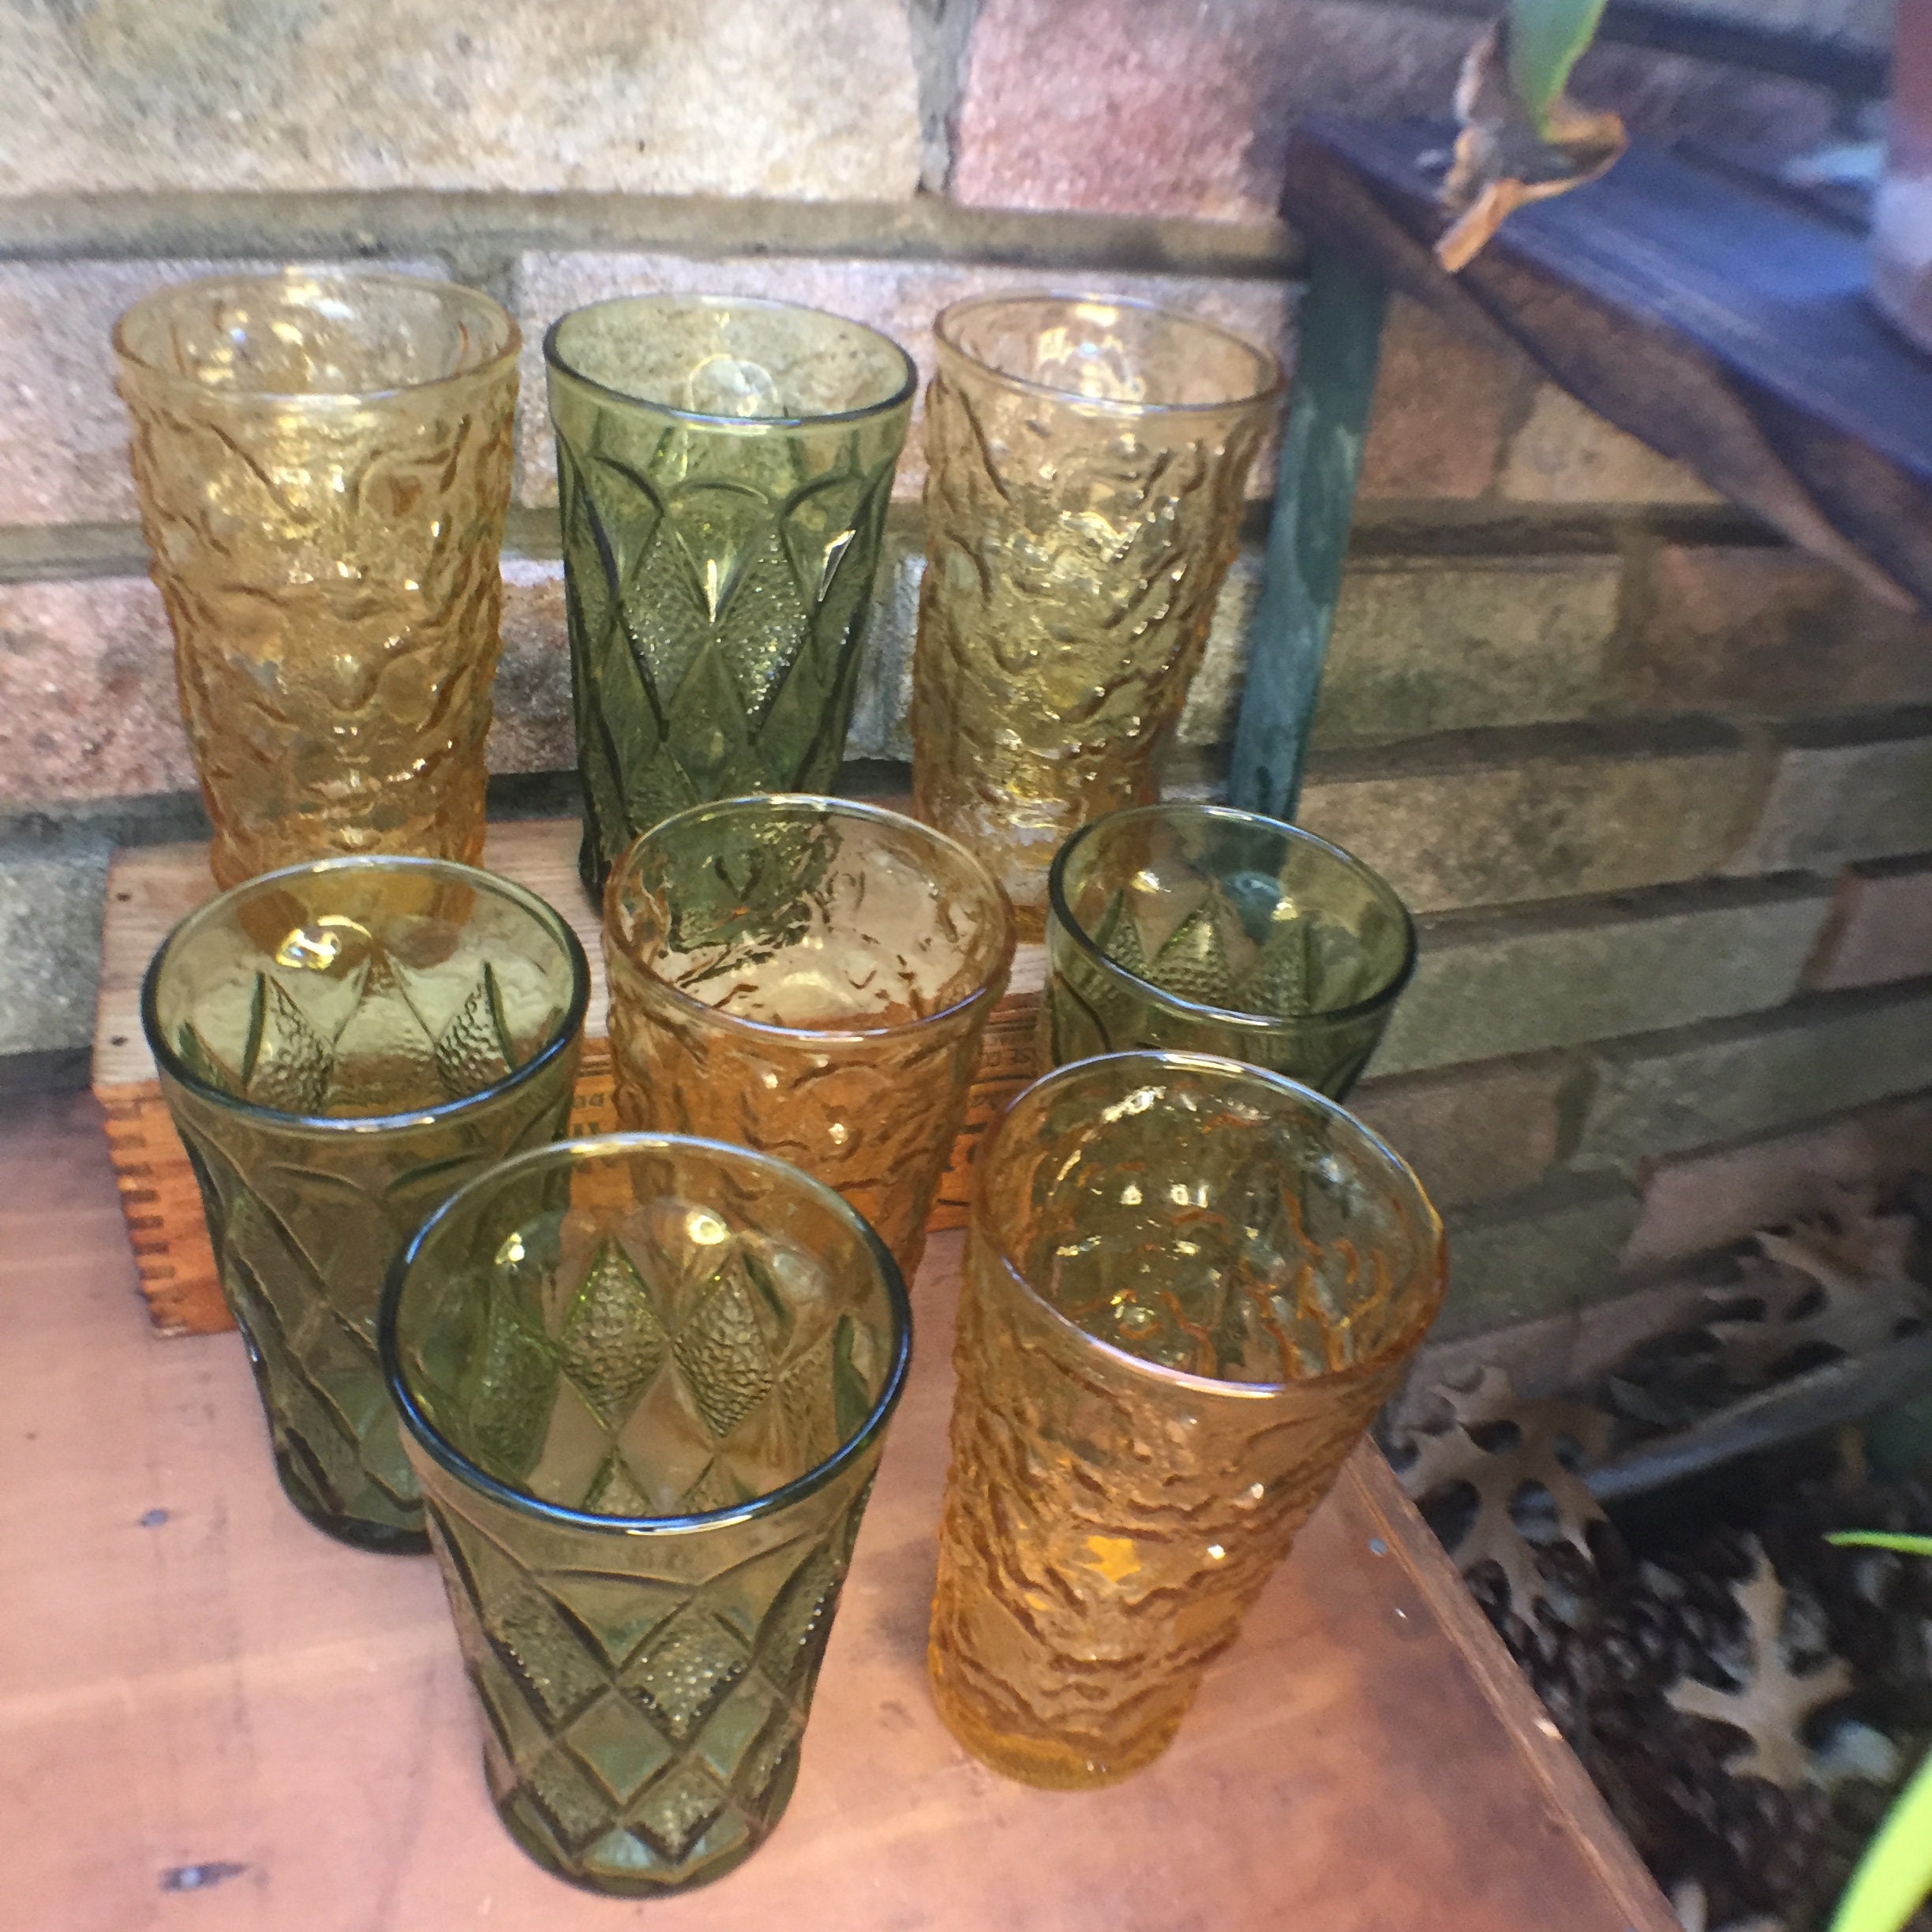 Unmatched Antique Drinking Glasses, Set of 8